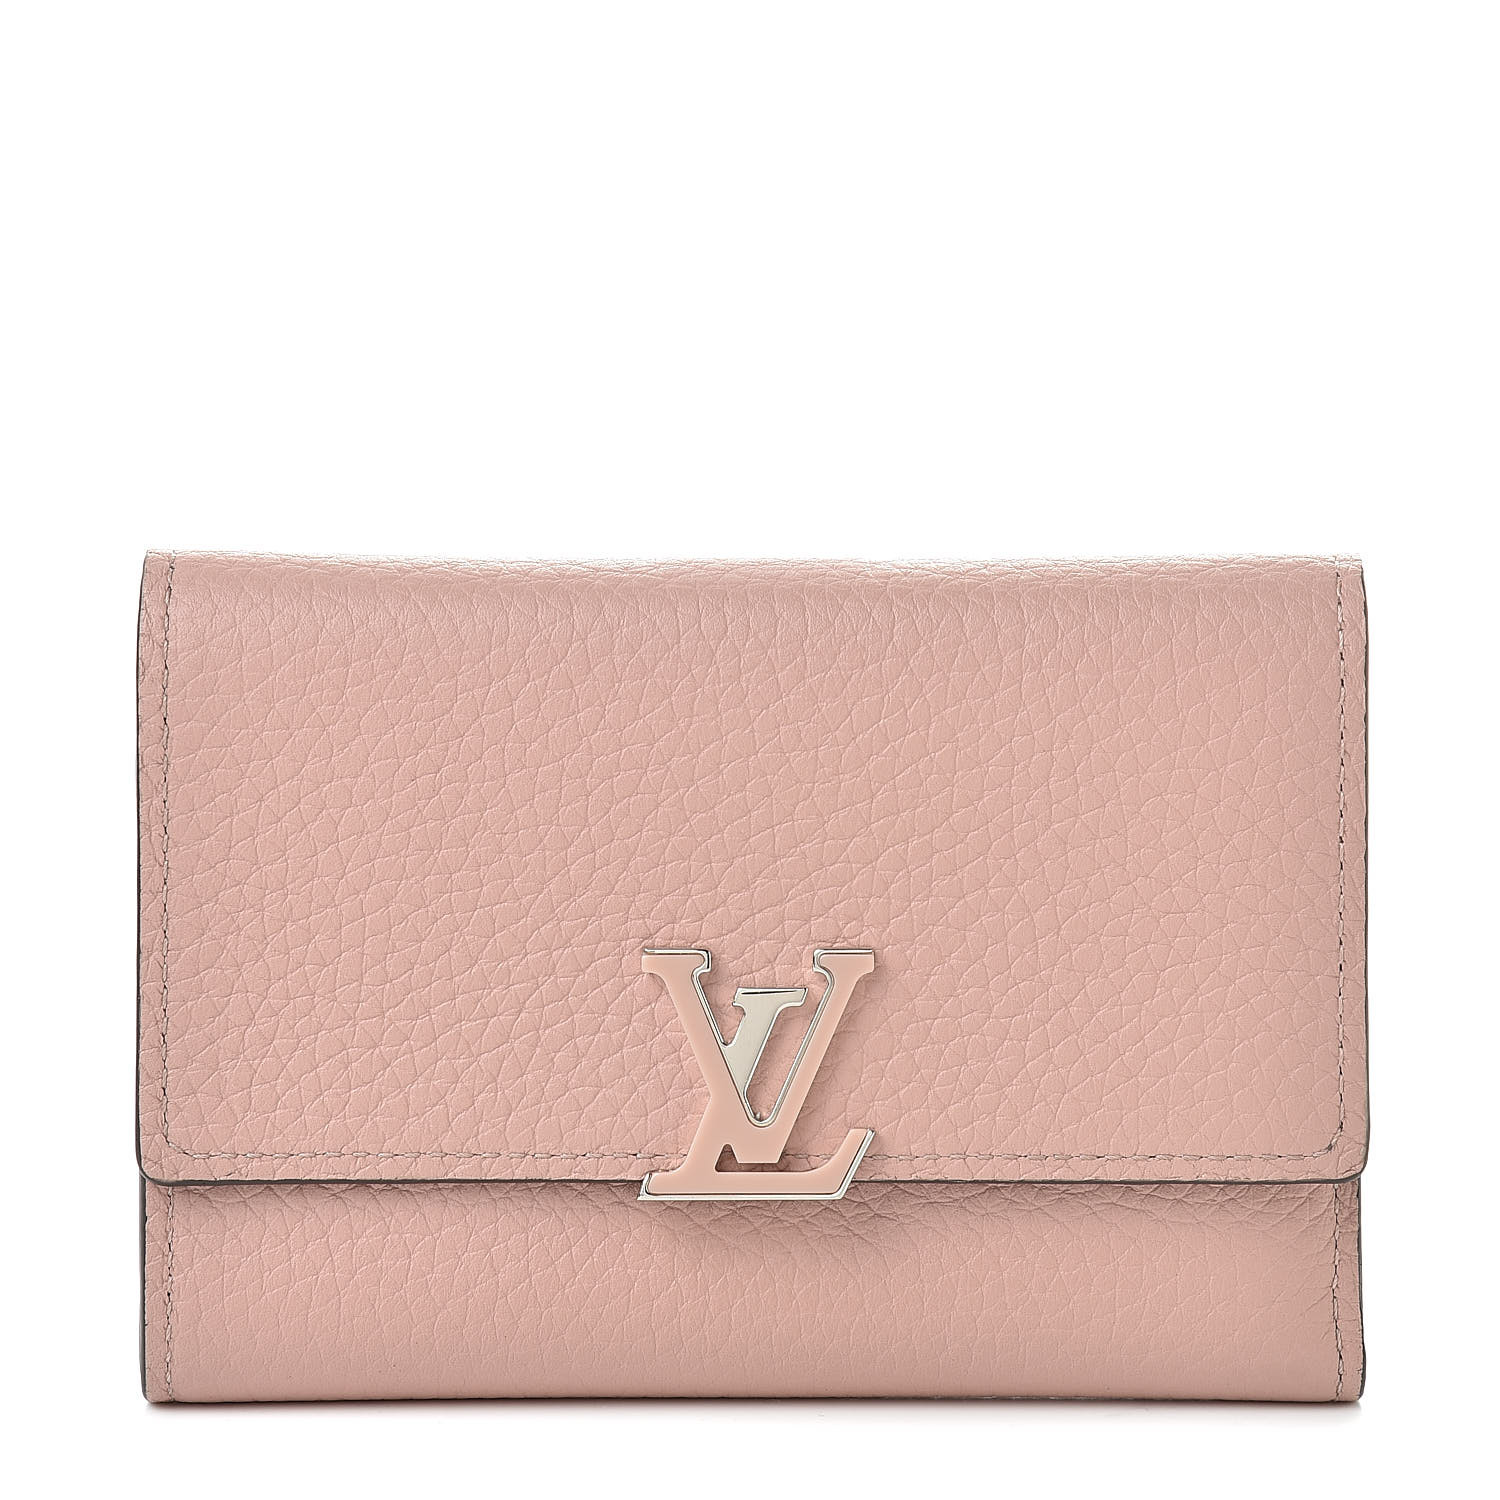 Louis Vuitton Capucines Compact Pink Wallet Magnolia New and